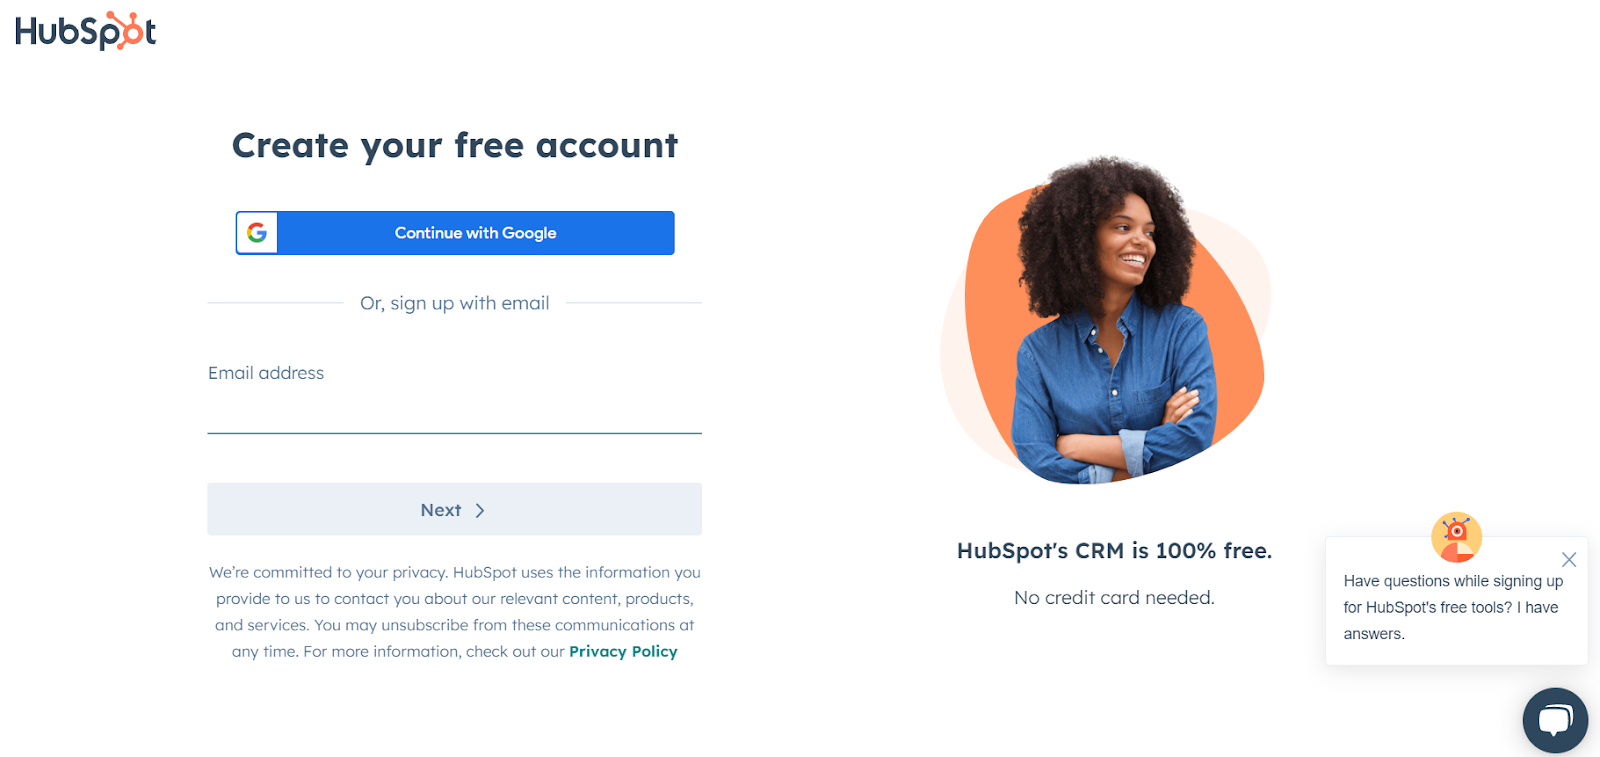 Step 1 - Go to HubSpot.com and use your email to create free account.